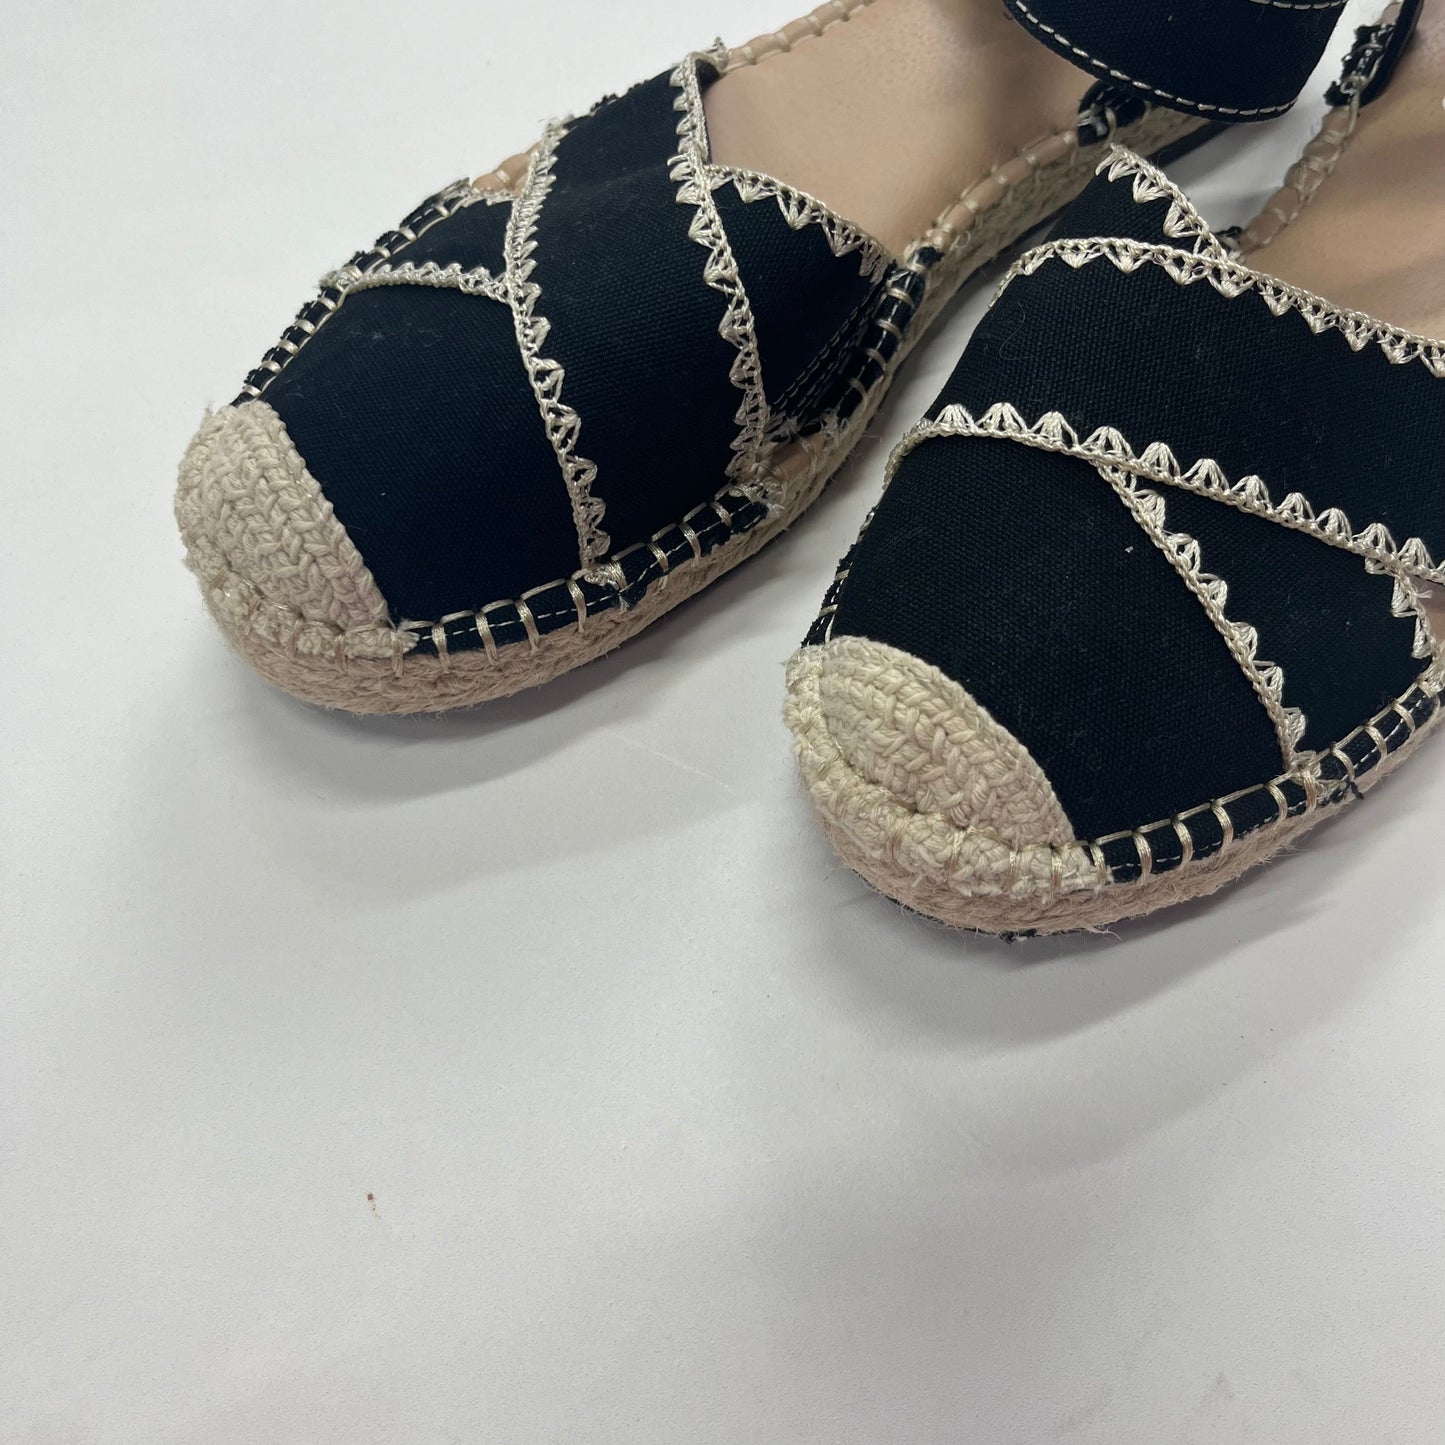 Black Shoes Flats Espadrille Time And Tru, Size 11